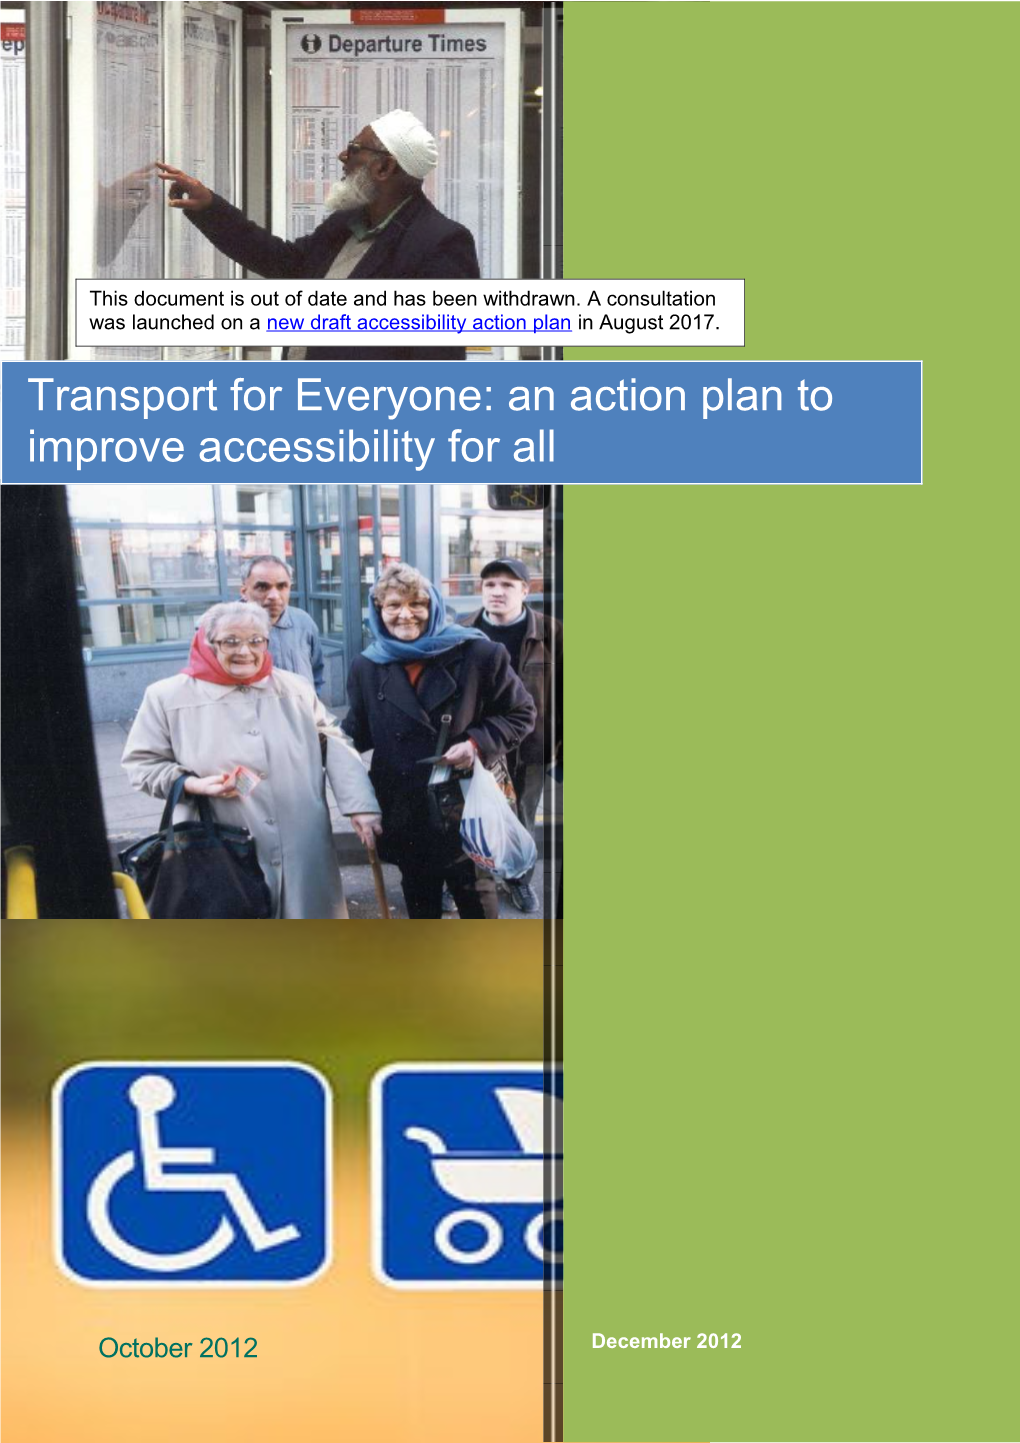 Transport for Everyone: an Action Plan to Improve Accessibility for All